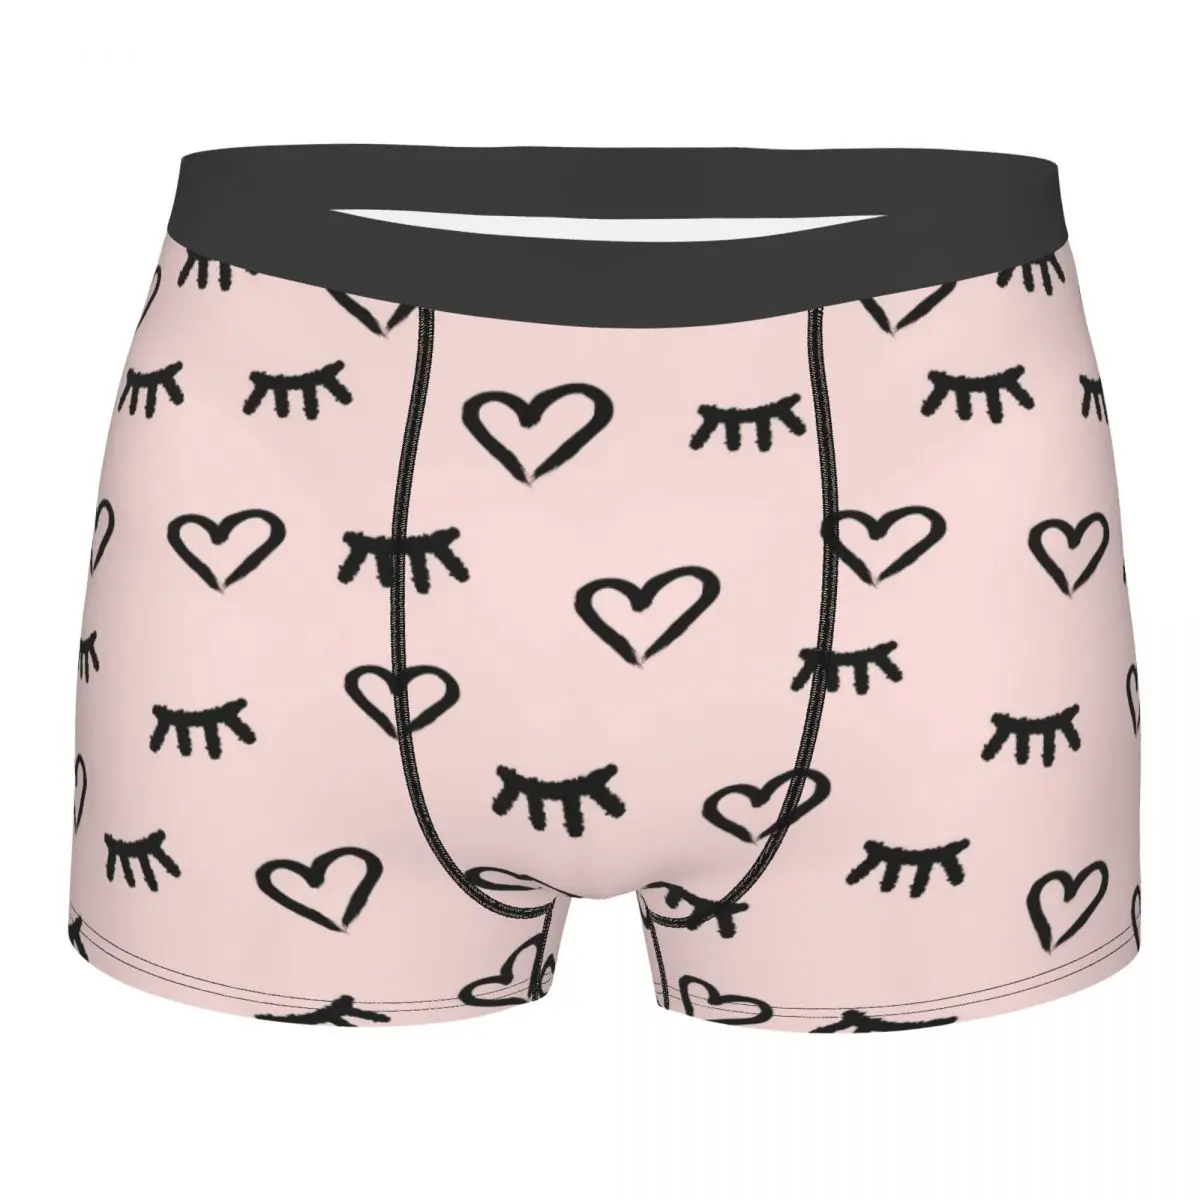 

Man Boxer Briefs Shorts Panties pattern with hearts and closed eyes Soft Underwear Homme Humor Plus Size Underpants